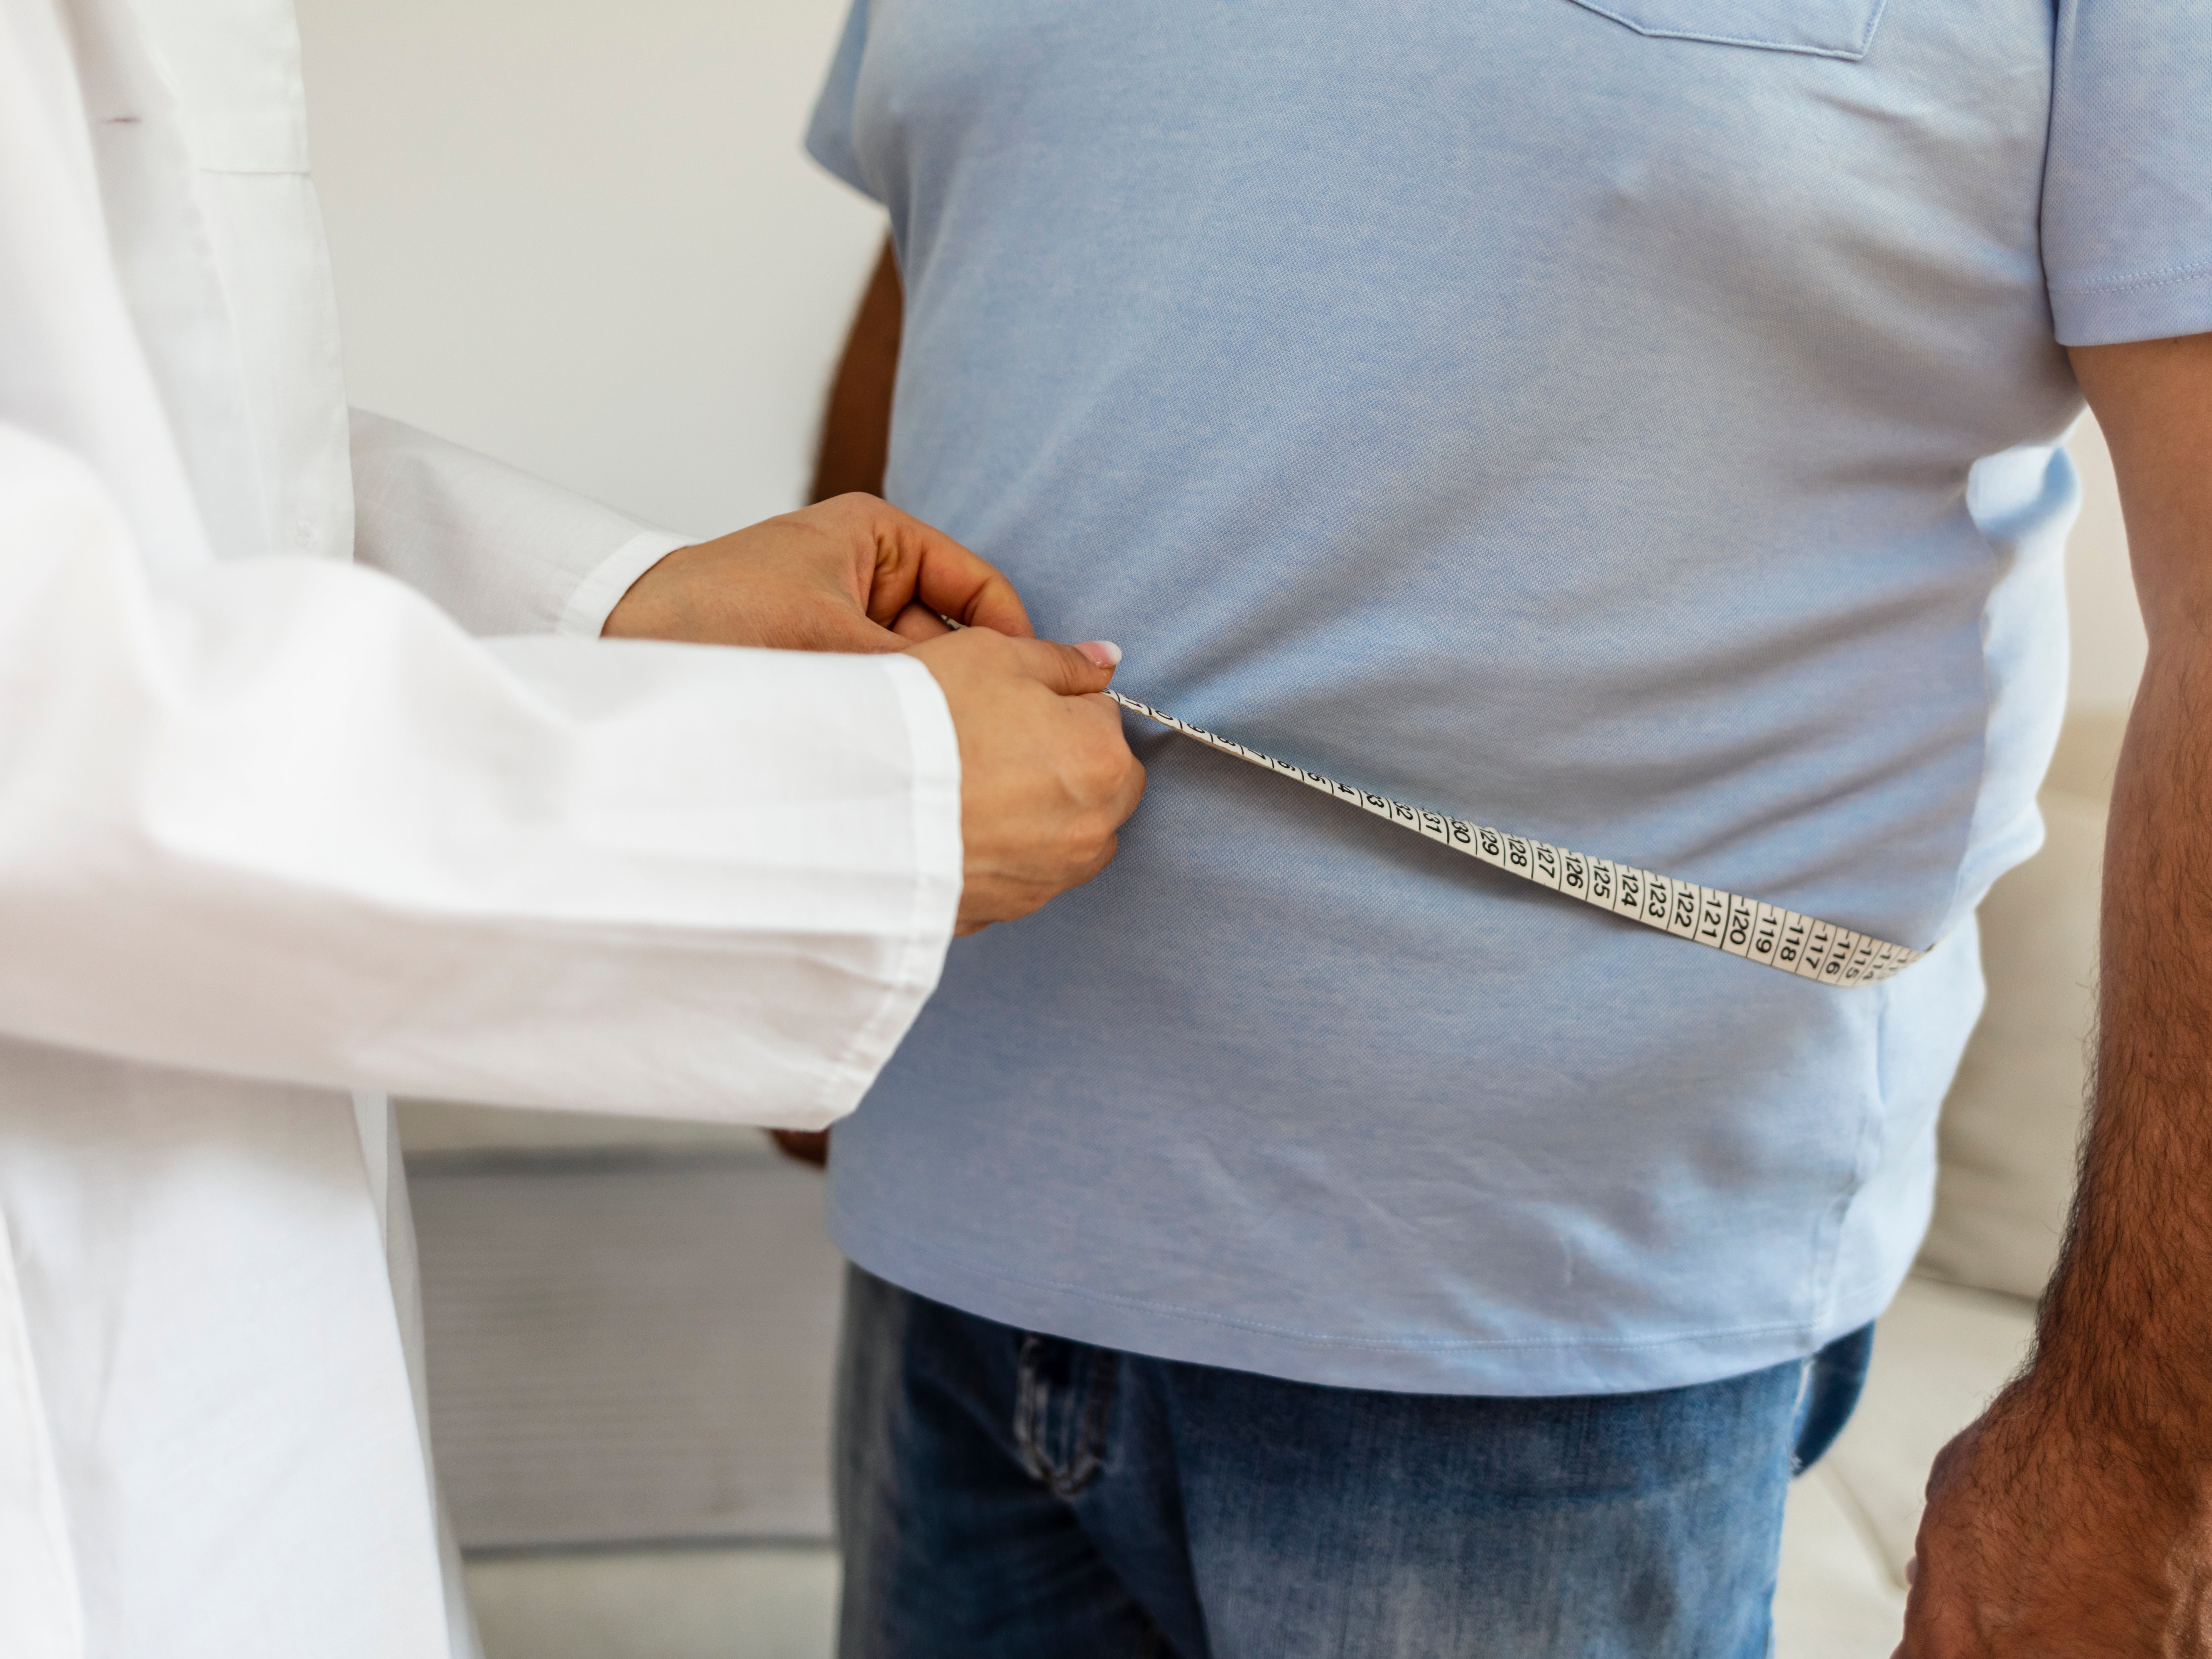 Healthcare is a common area where obese people face stigma over their weight, scientists say